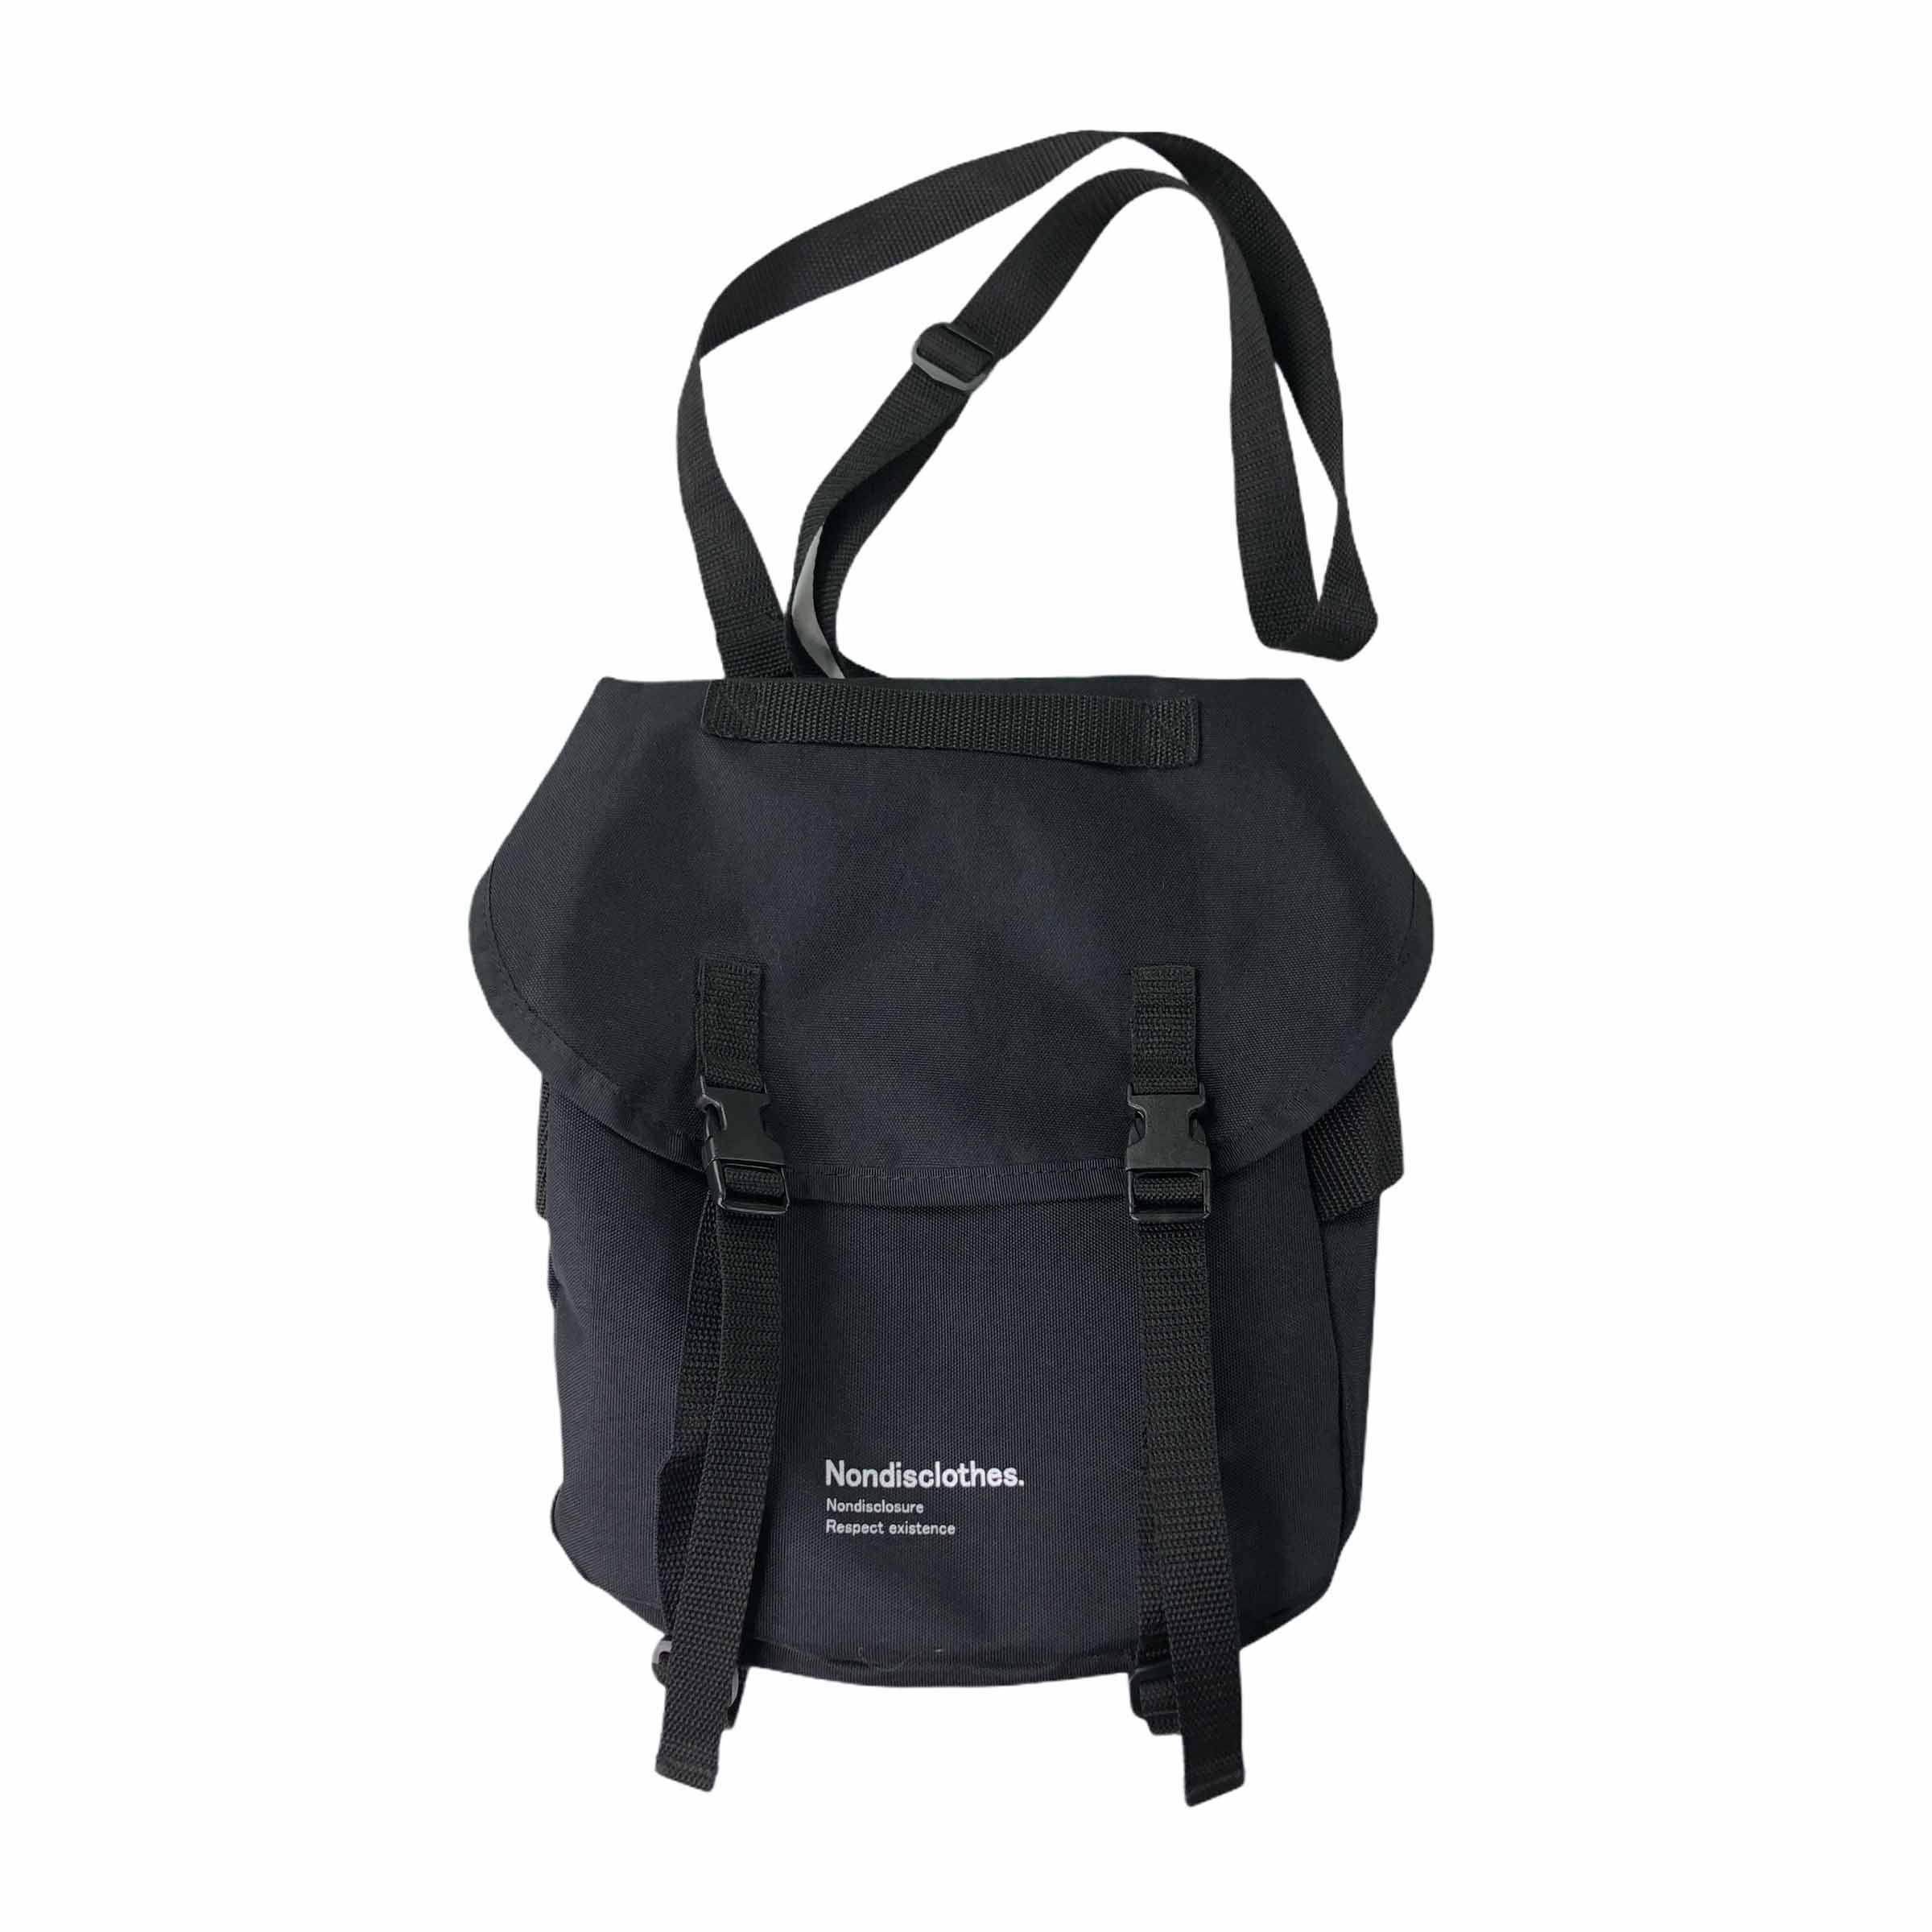 [Nondisclothes] 60 Side Bag - Size Free